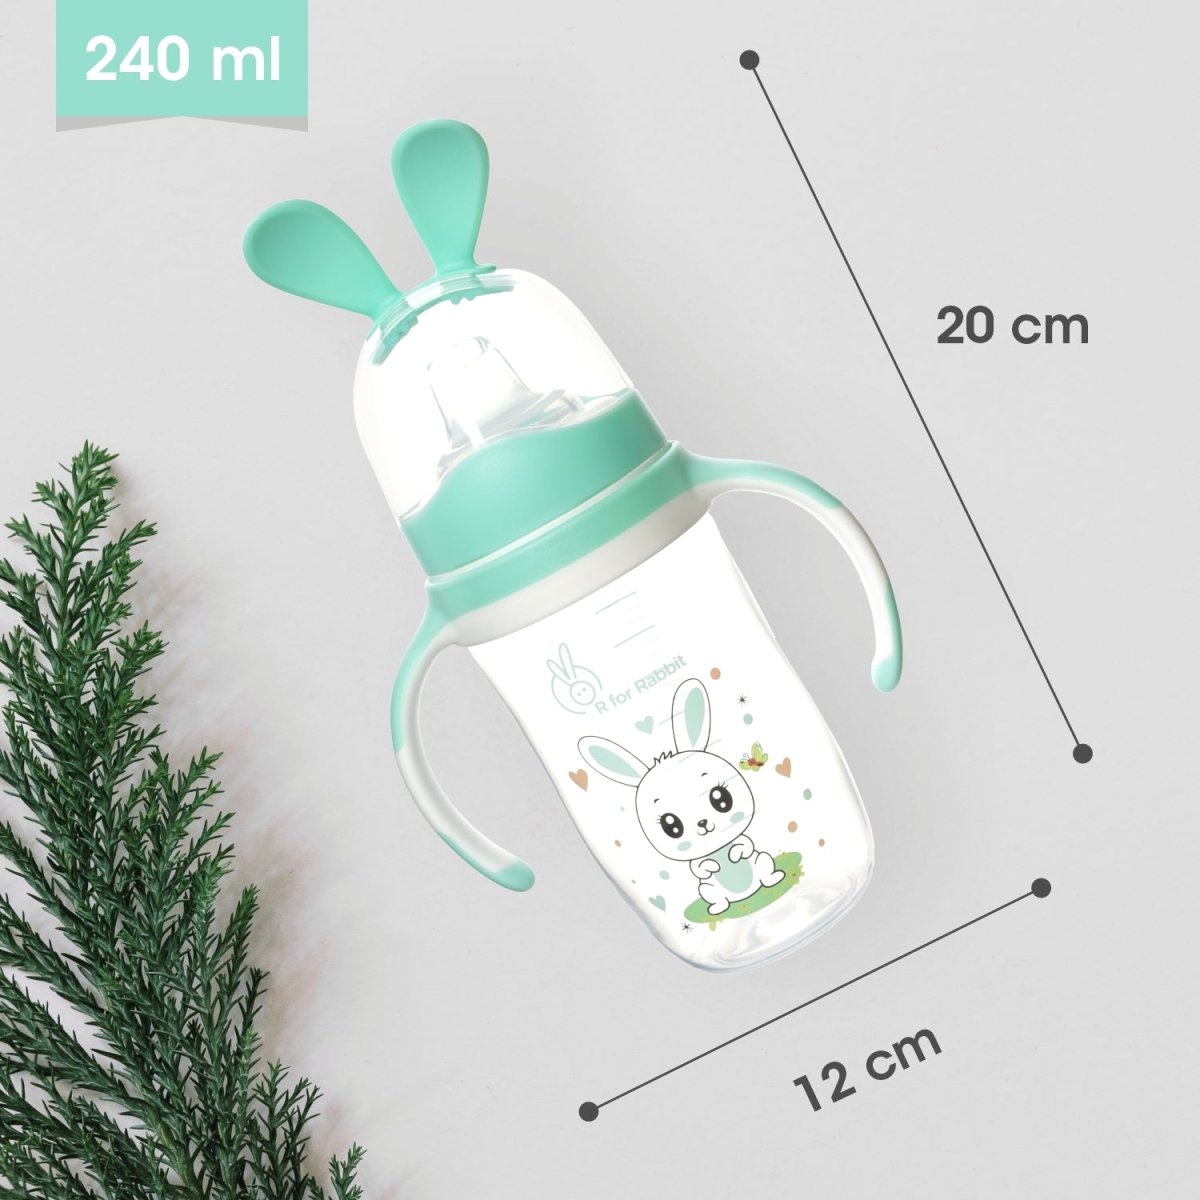 R for Rabbit Bunny Baby Spout Sippy Cup- Green - SSBNG01